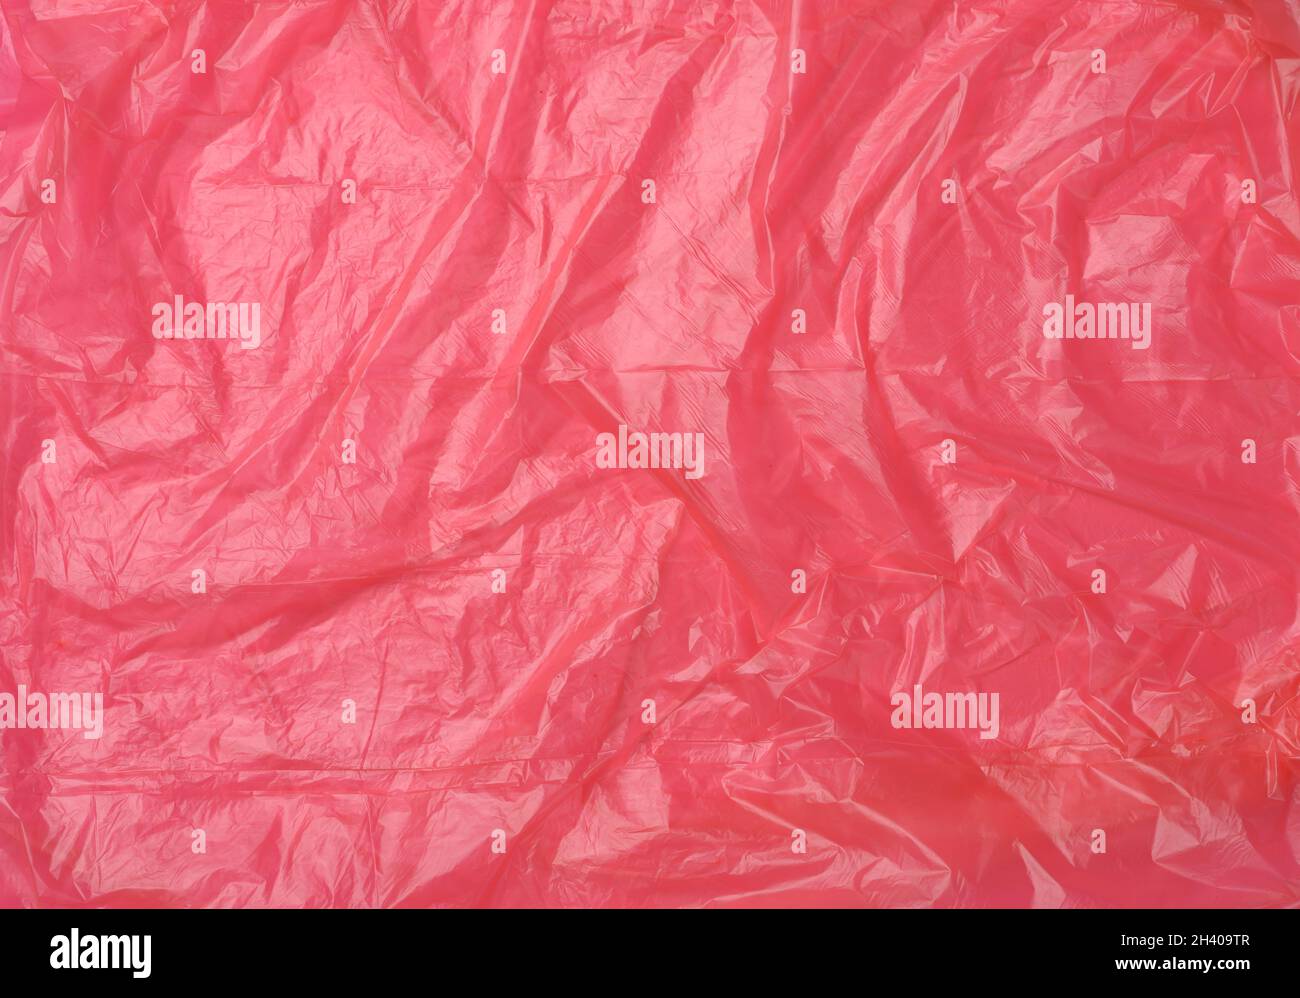 Crumpled red polyethylene texture, close up, full frame Stock Photo